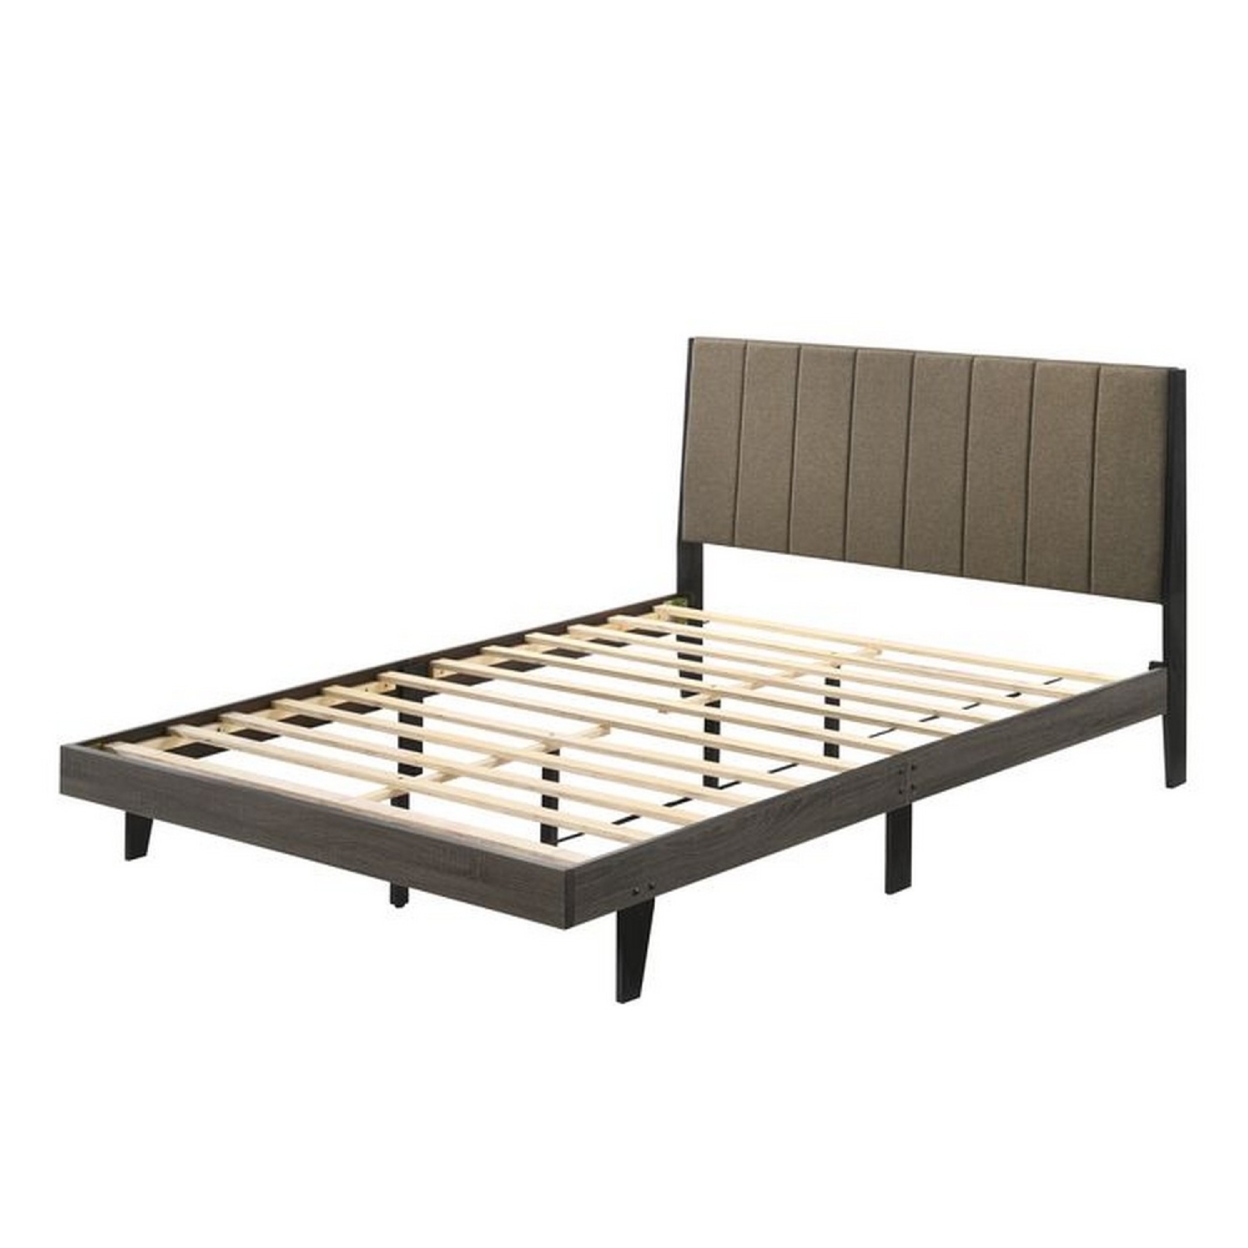 85 Inch Wood Queen Platform Bed, Channel Tufting, Taupe Brown Fabric- Saltoro Sherpi